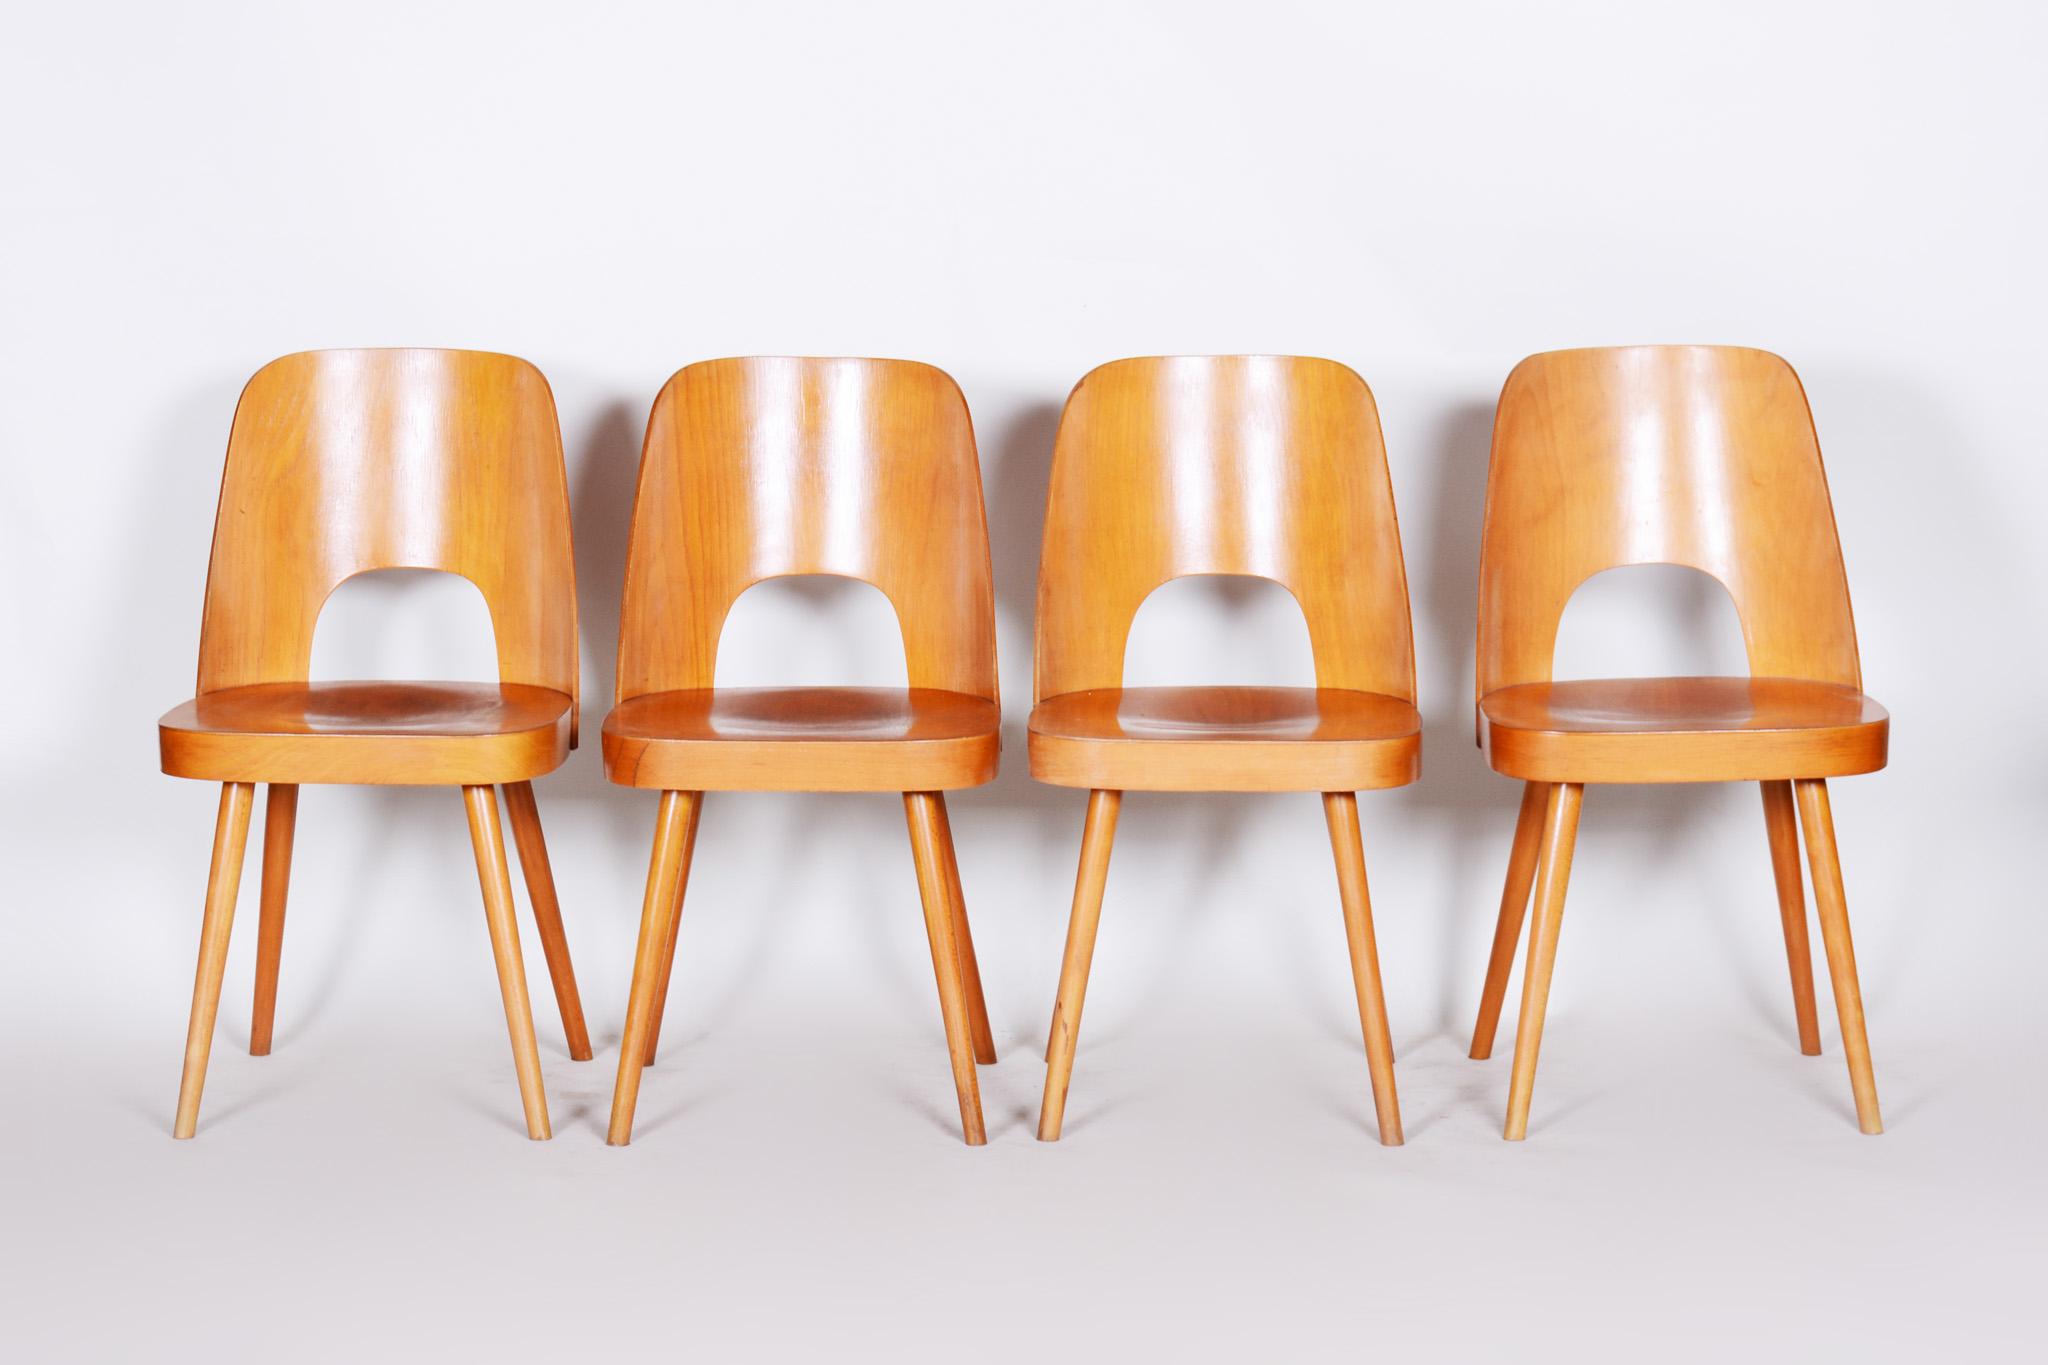 Czech midcentury chairs, 4 pieces.
Material: Beech
Period: 1950-1959
Original preserved condition
Made by architect Oswald Haerdtl.